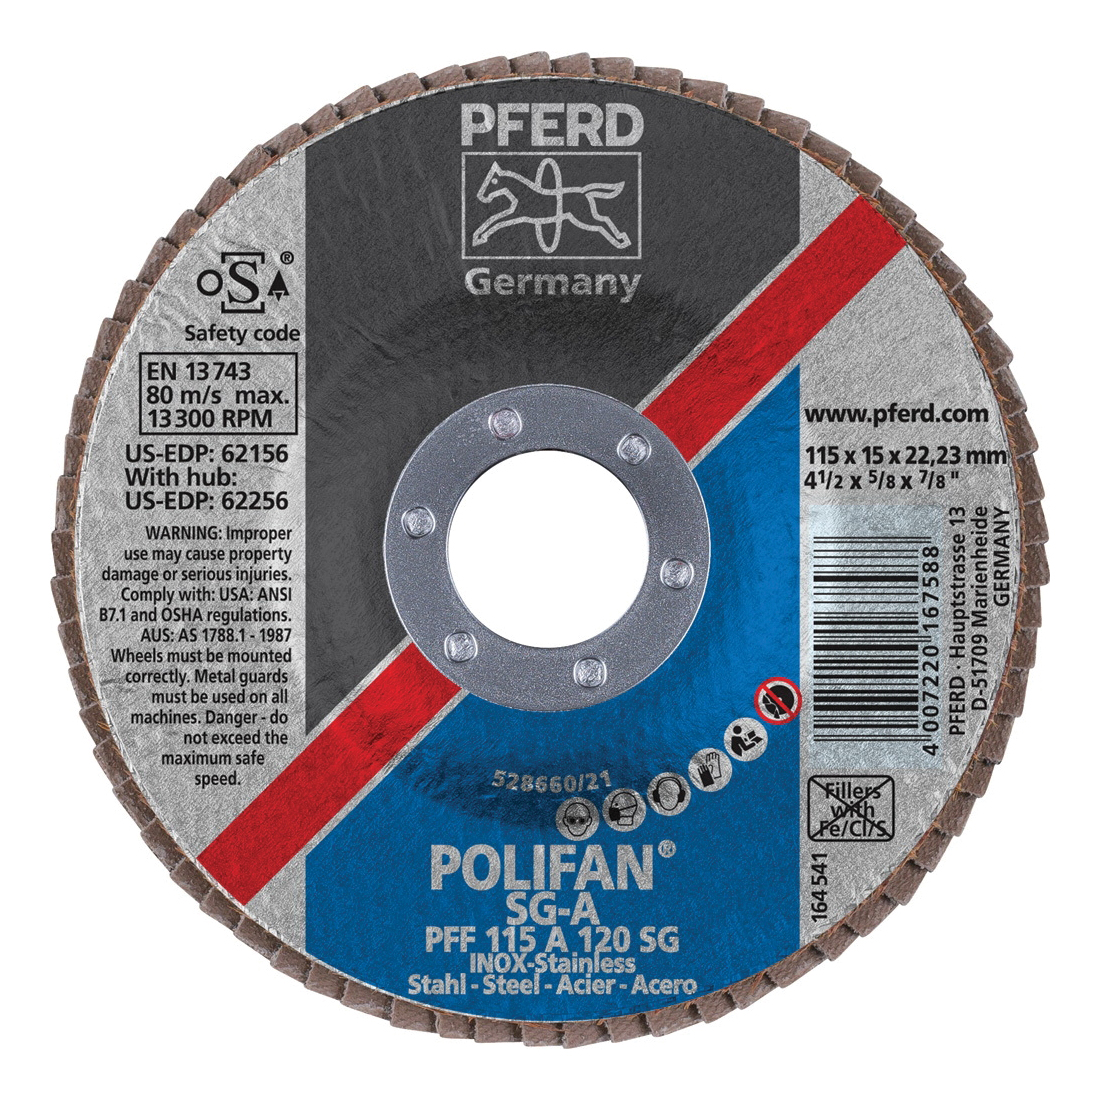 PFERD Polifan® 62156 Performance Line SG A Unthreaded Coated Abrasive Flap Disc, 4-1/2 in Dia, 7/8 in Center Hole, 120 Grit, Aluminum Oxide Abrasive, Type 27 Flat Disc